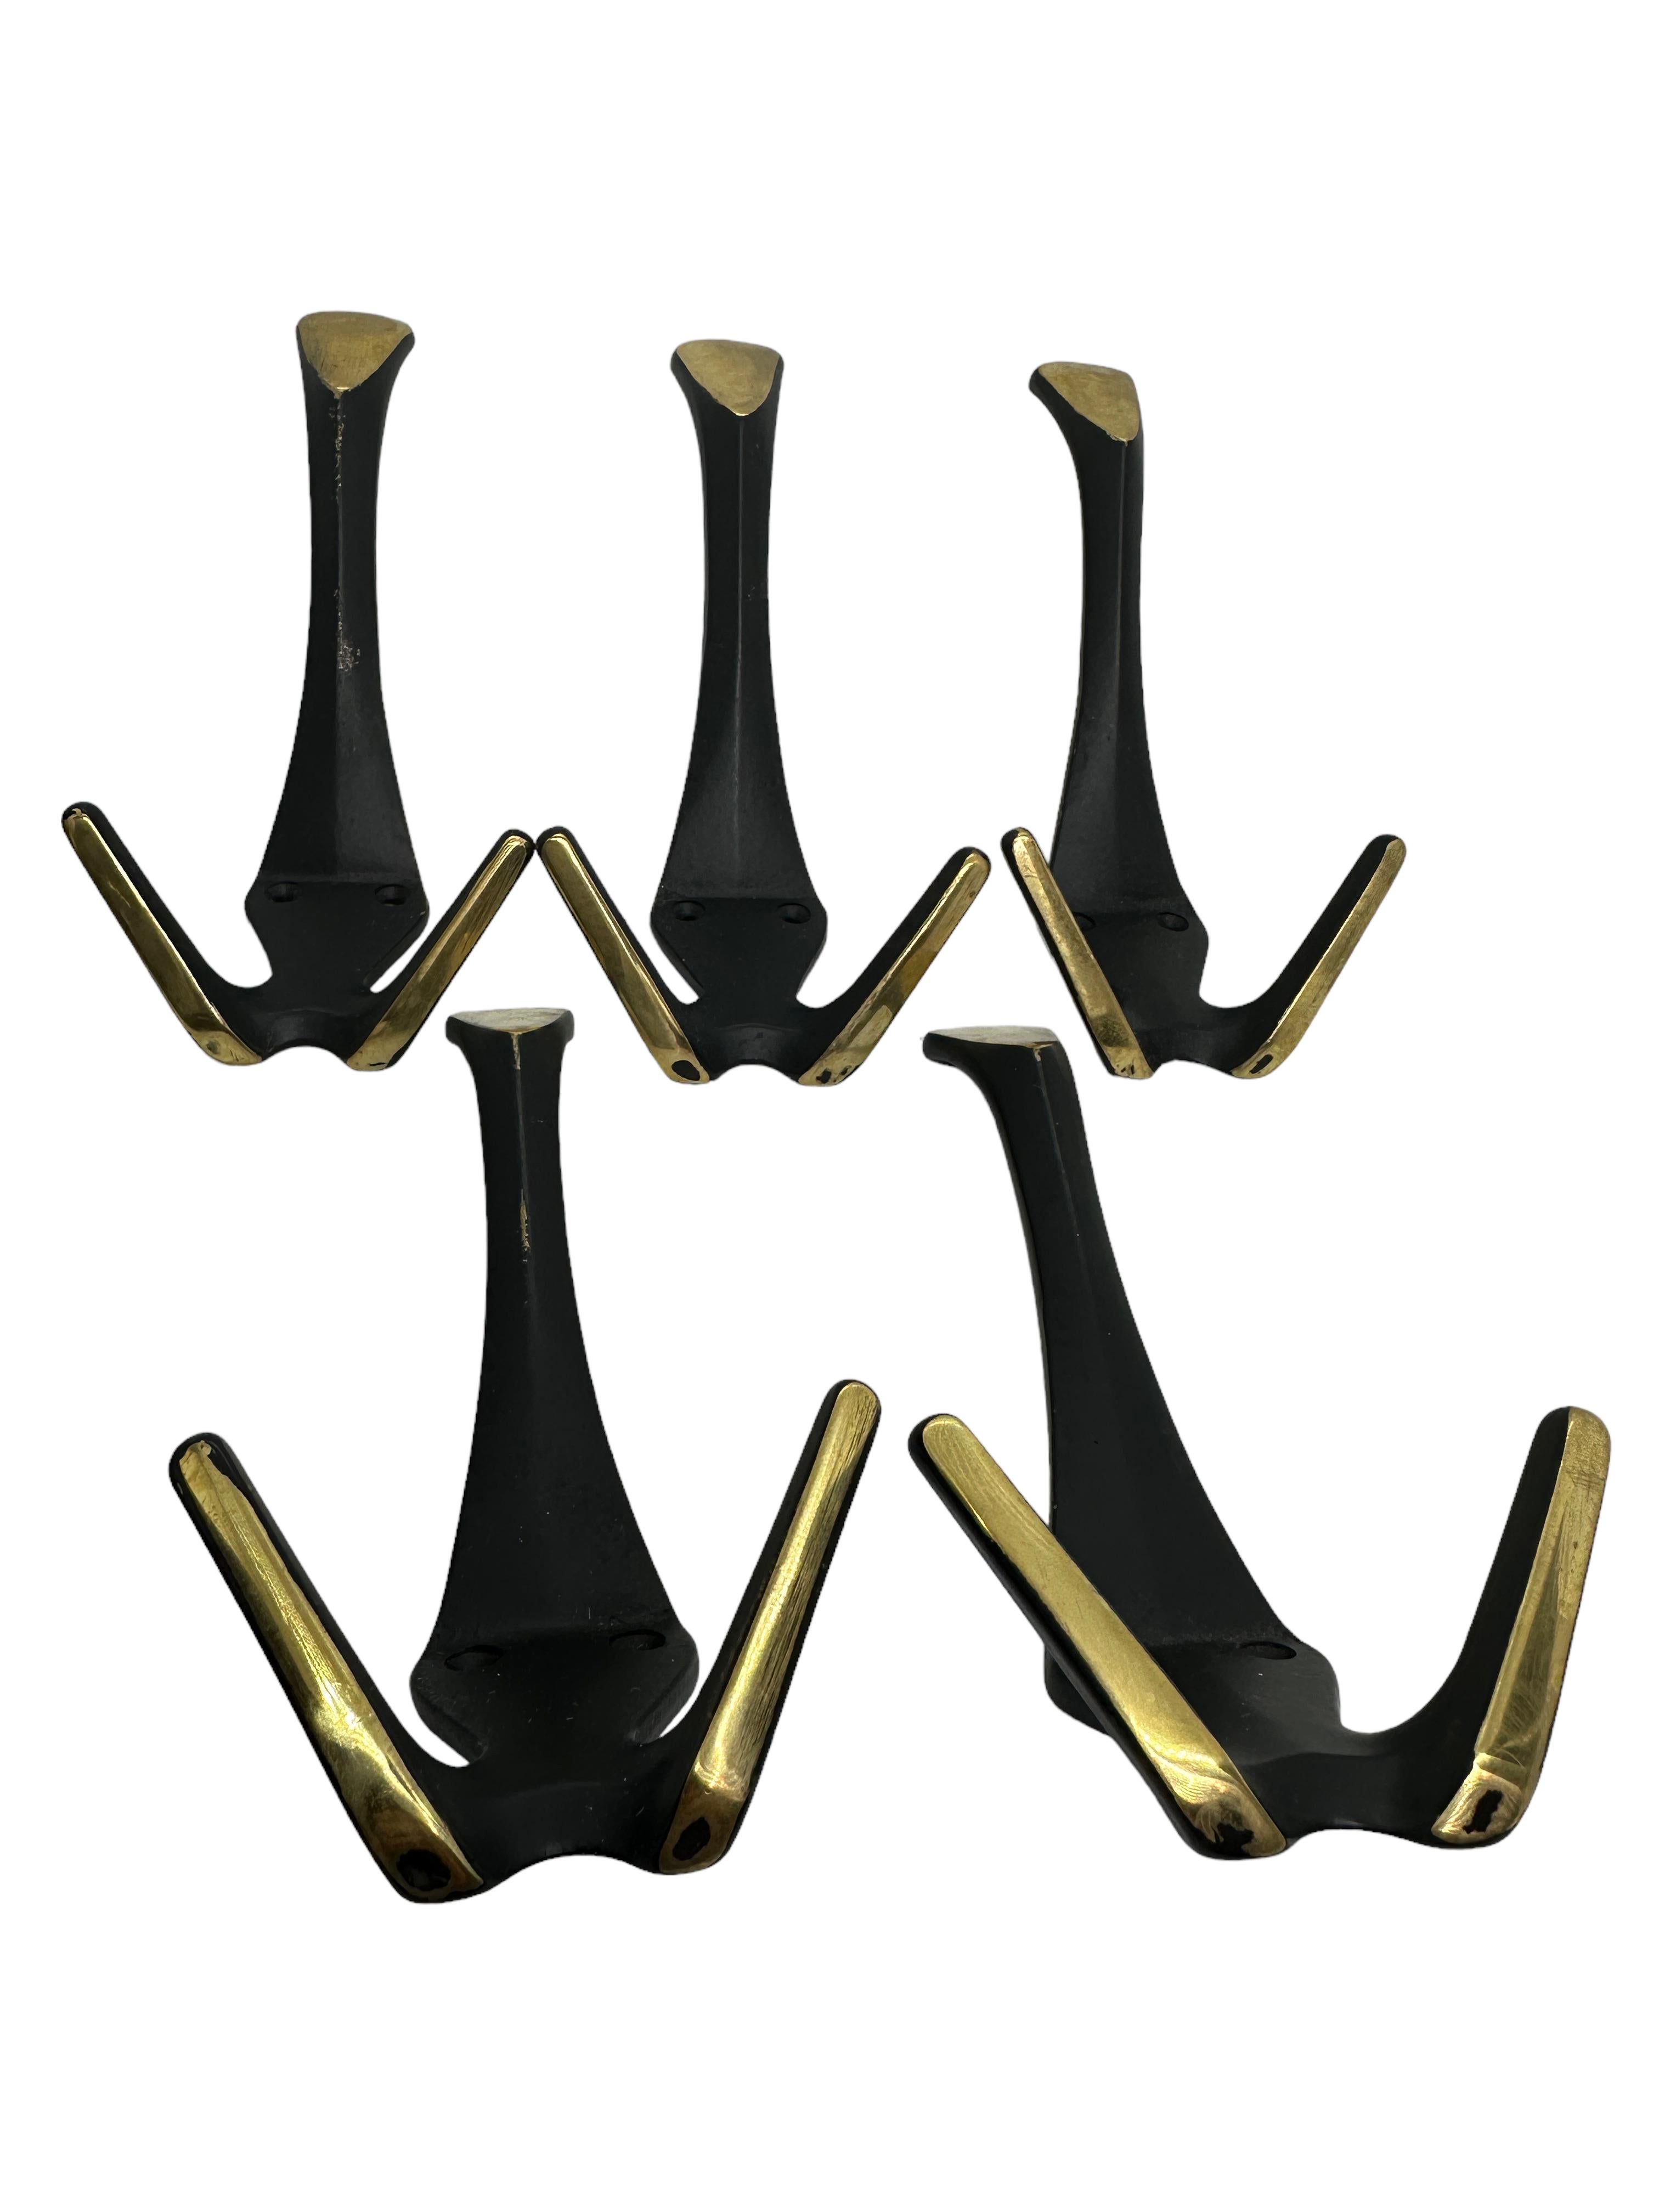 German Set of Five Coat Wall Coat Hooks, Black and Brass, Mid-Century Modern, 1950s For Sale